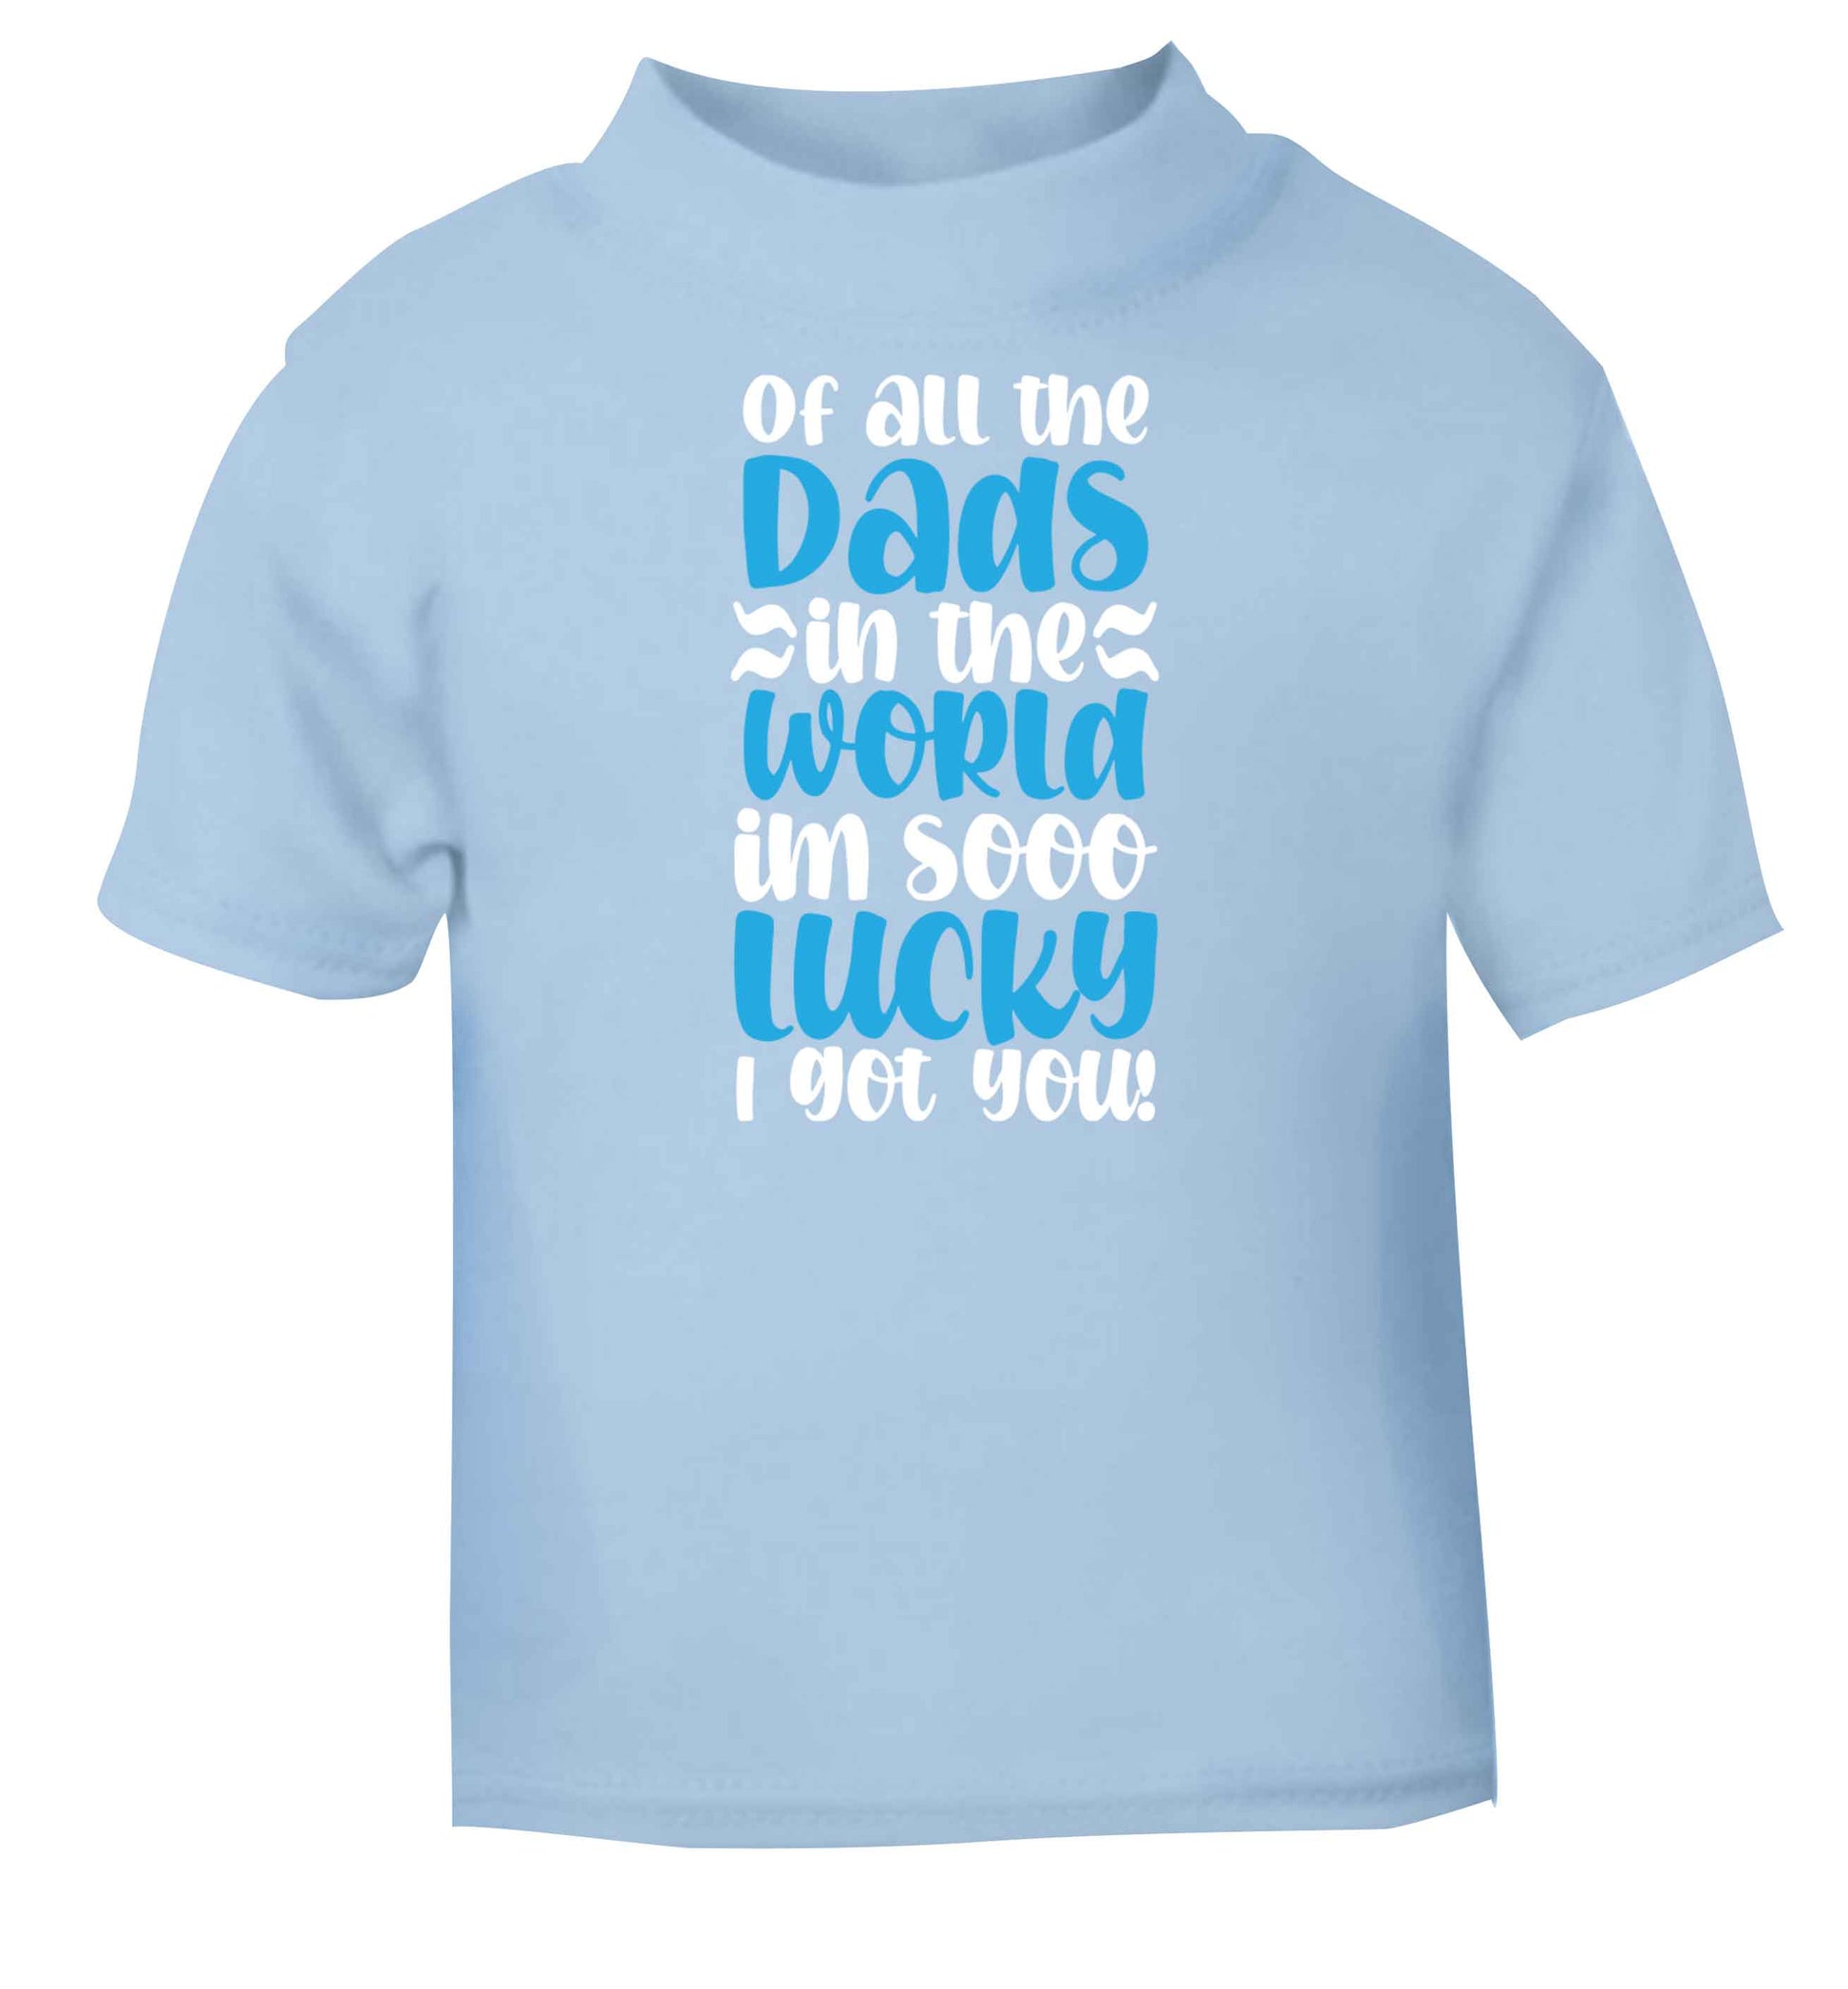 I'm as lucky as can be the worlds greatest dad belongs to me! light blue baby toddler Tshirt 2 Years